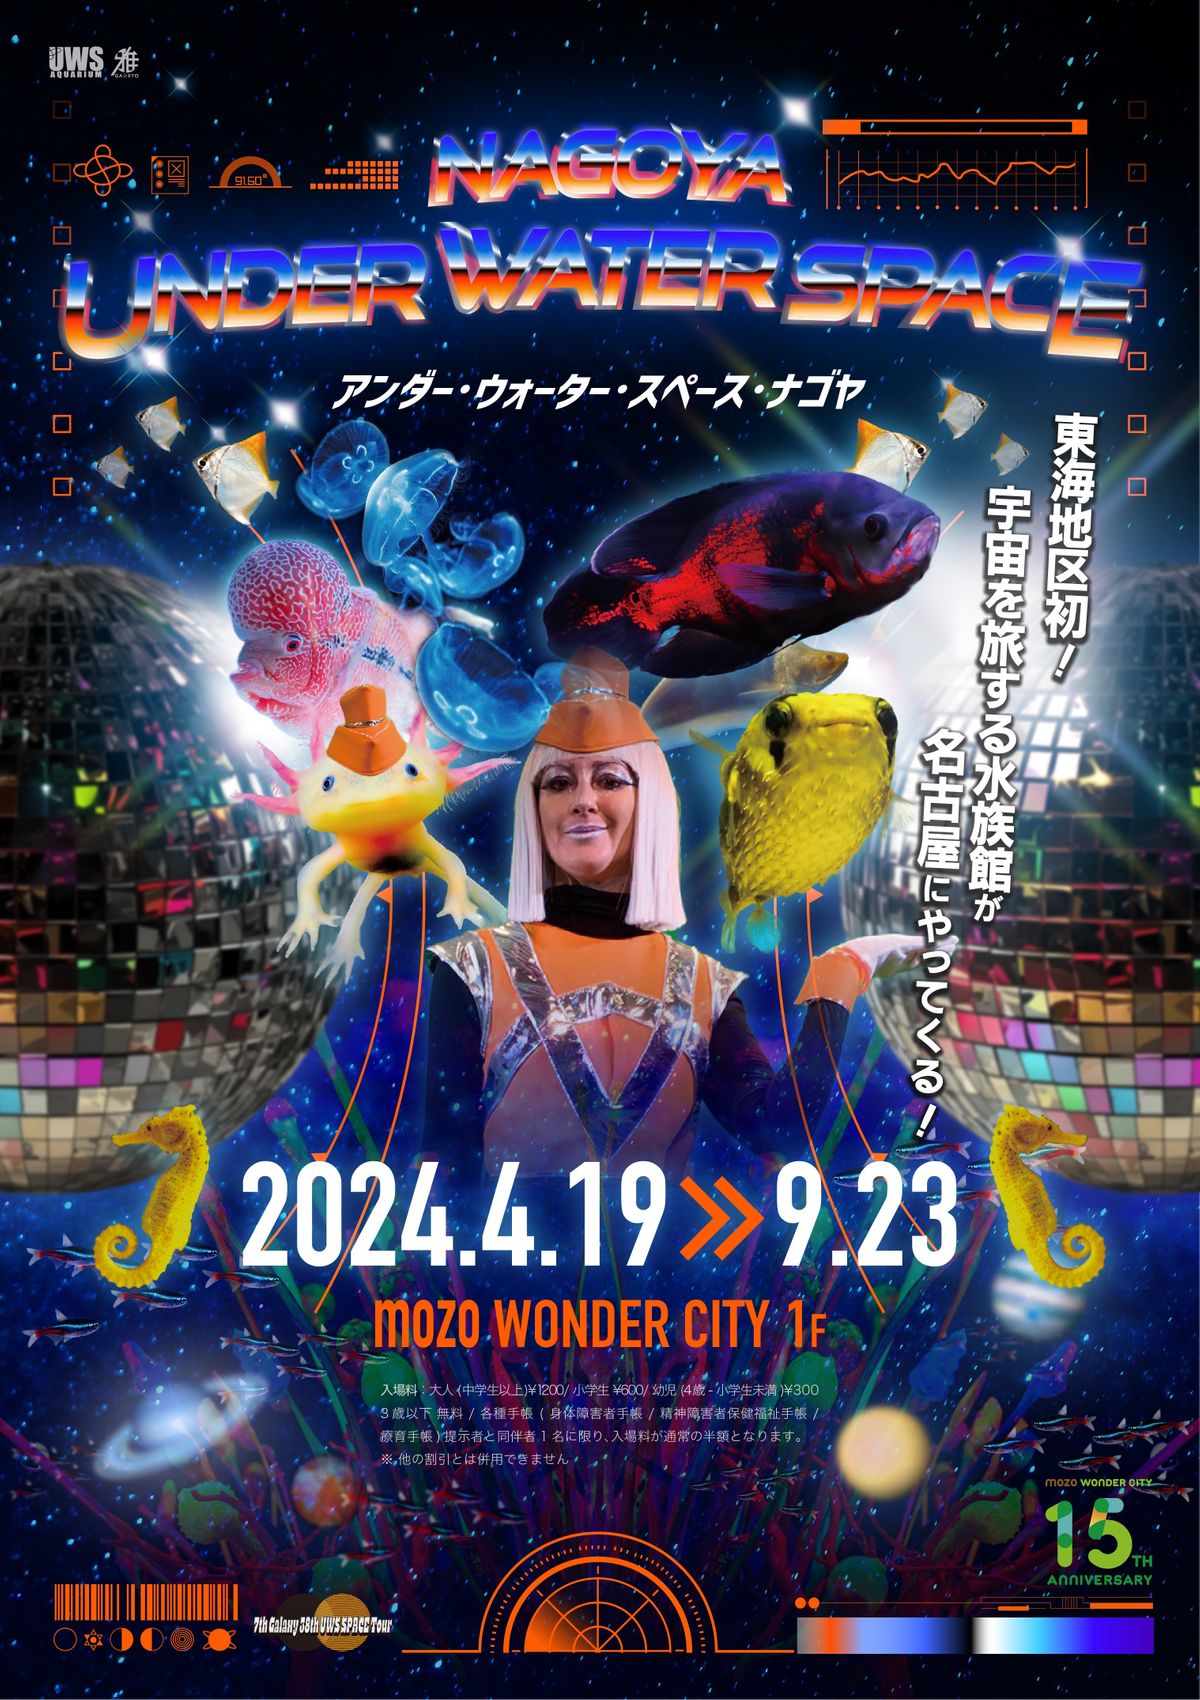 「UNDER WATER SPACE アクアリウム宇宙旅行」ポスター